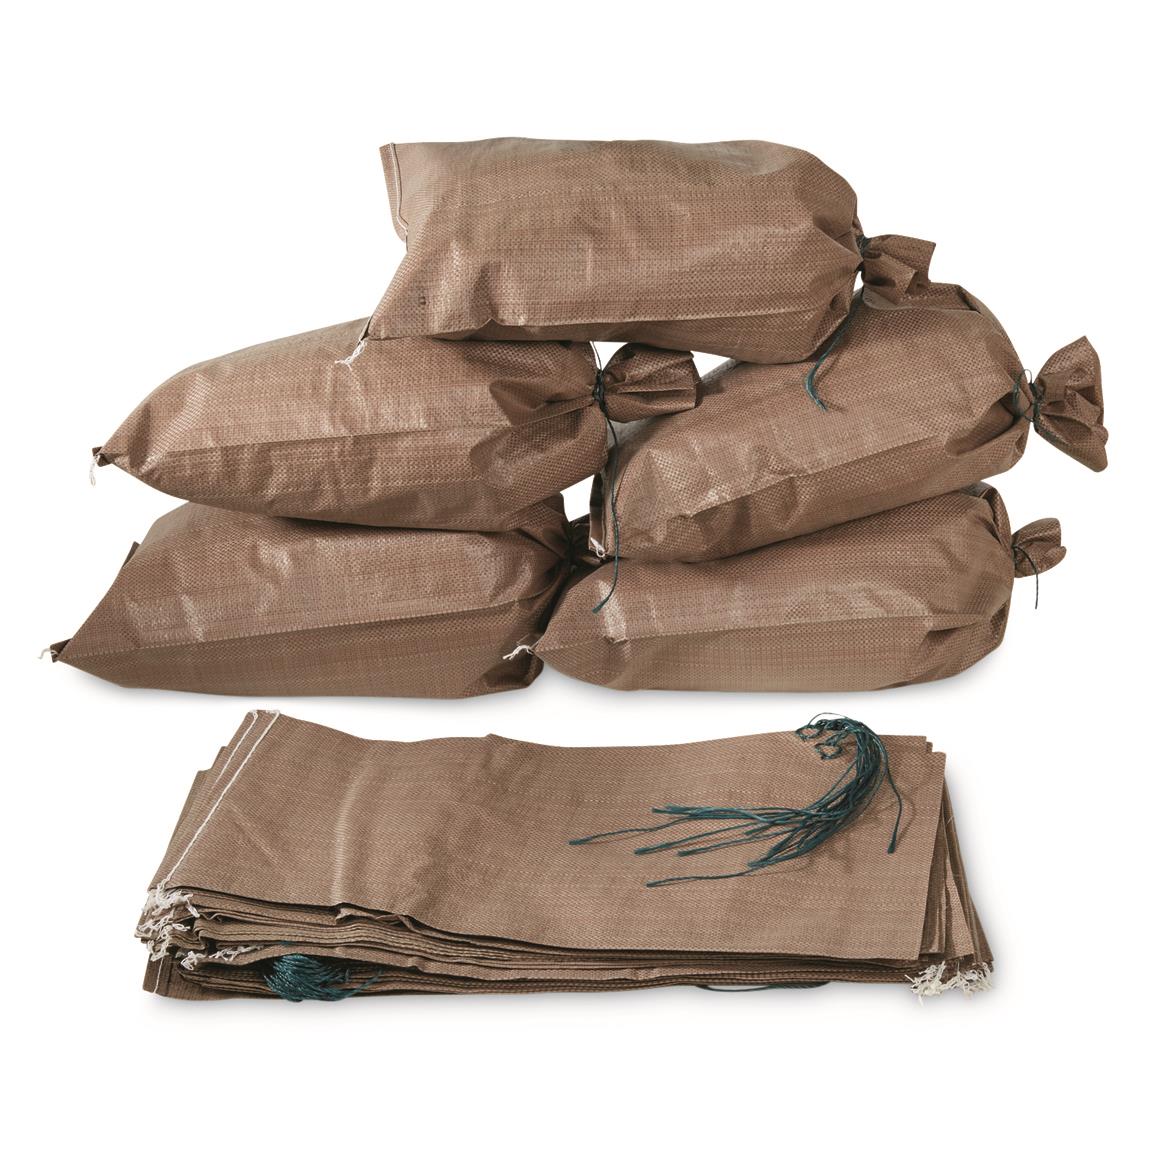 U.S. Military Surplus Woven Sand Bags, 50 pack, New, Coyote